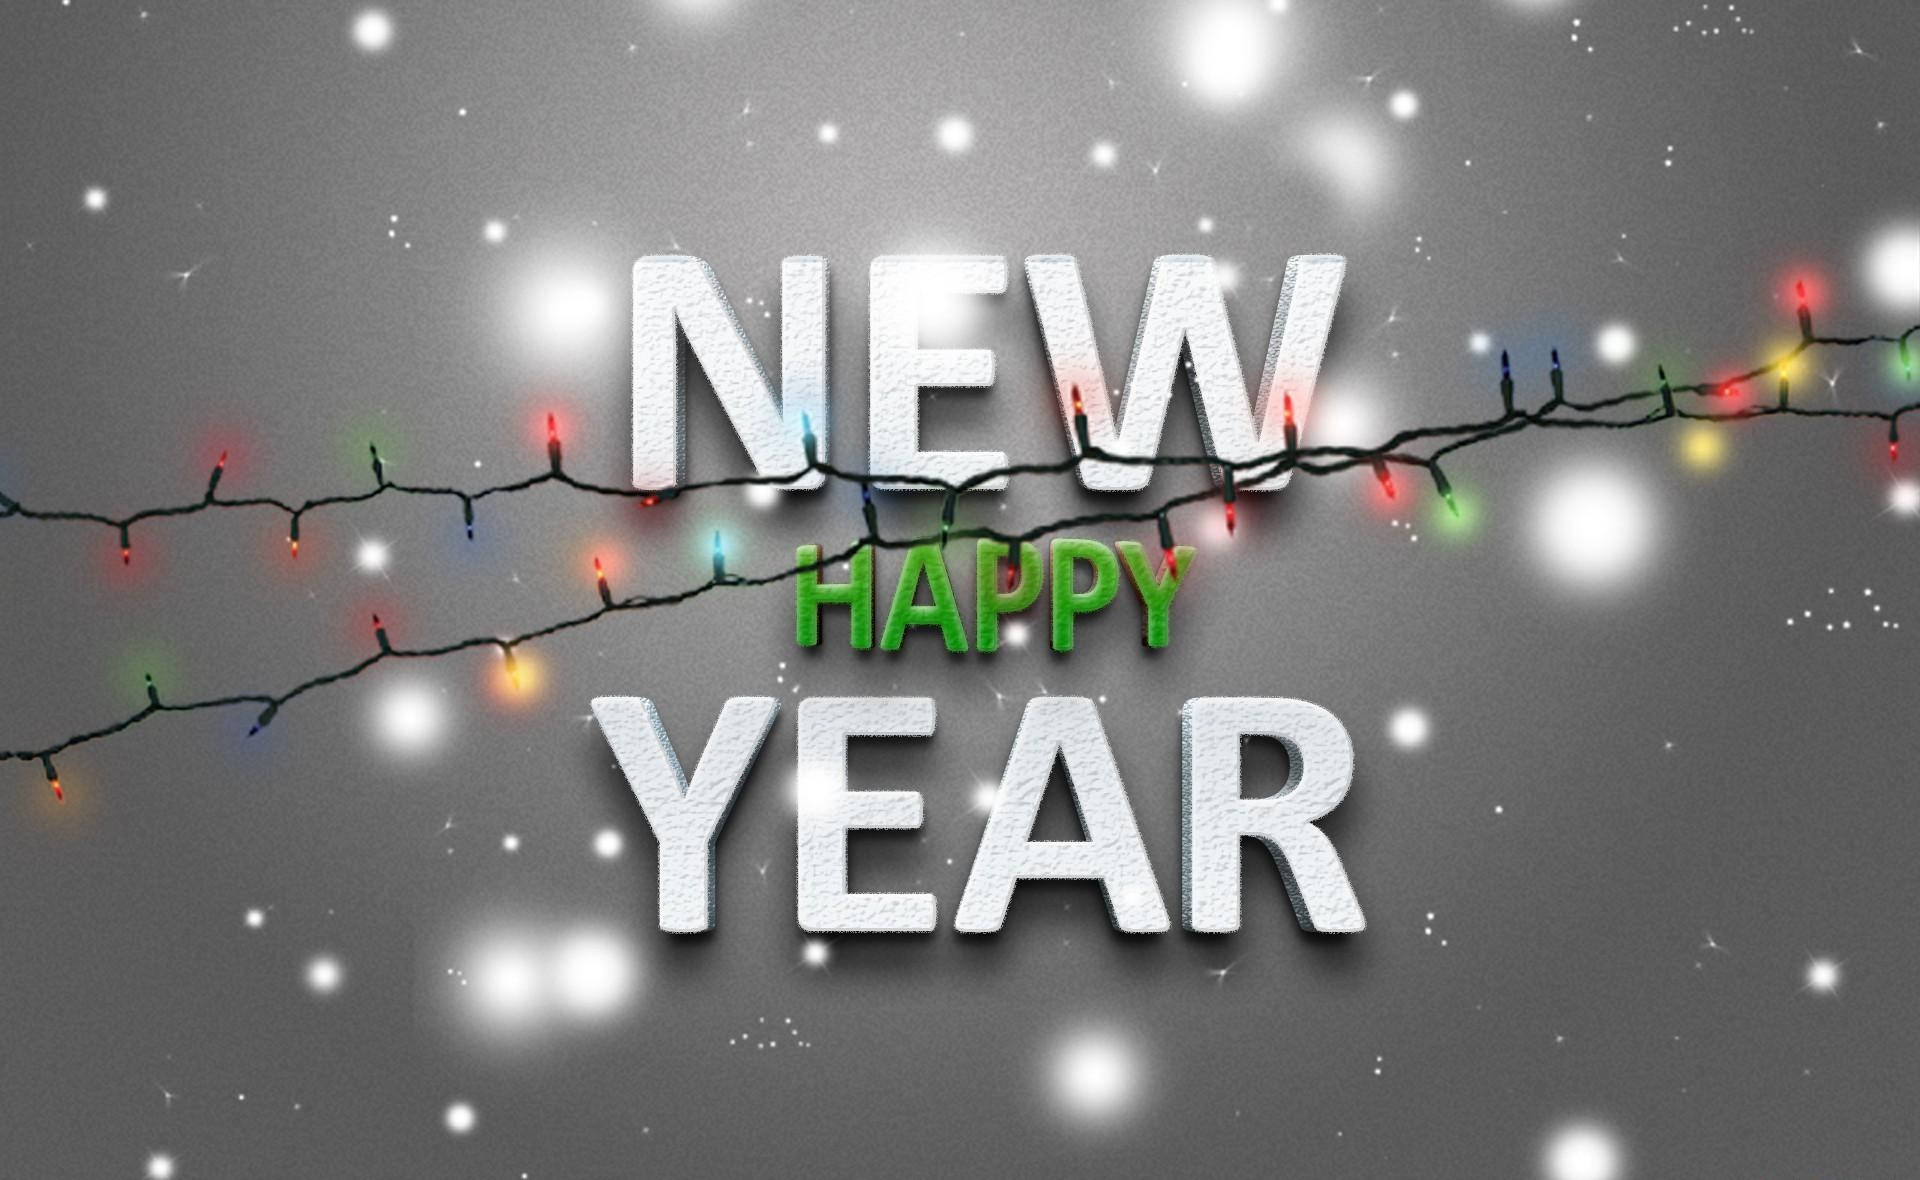 Happy New Year With Snow And Lights Wallpaper